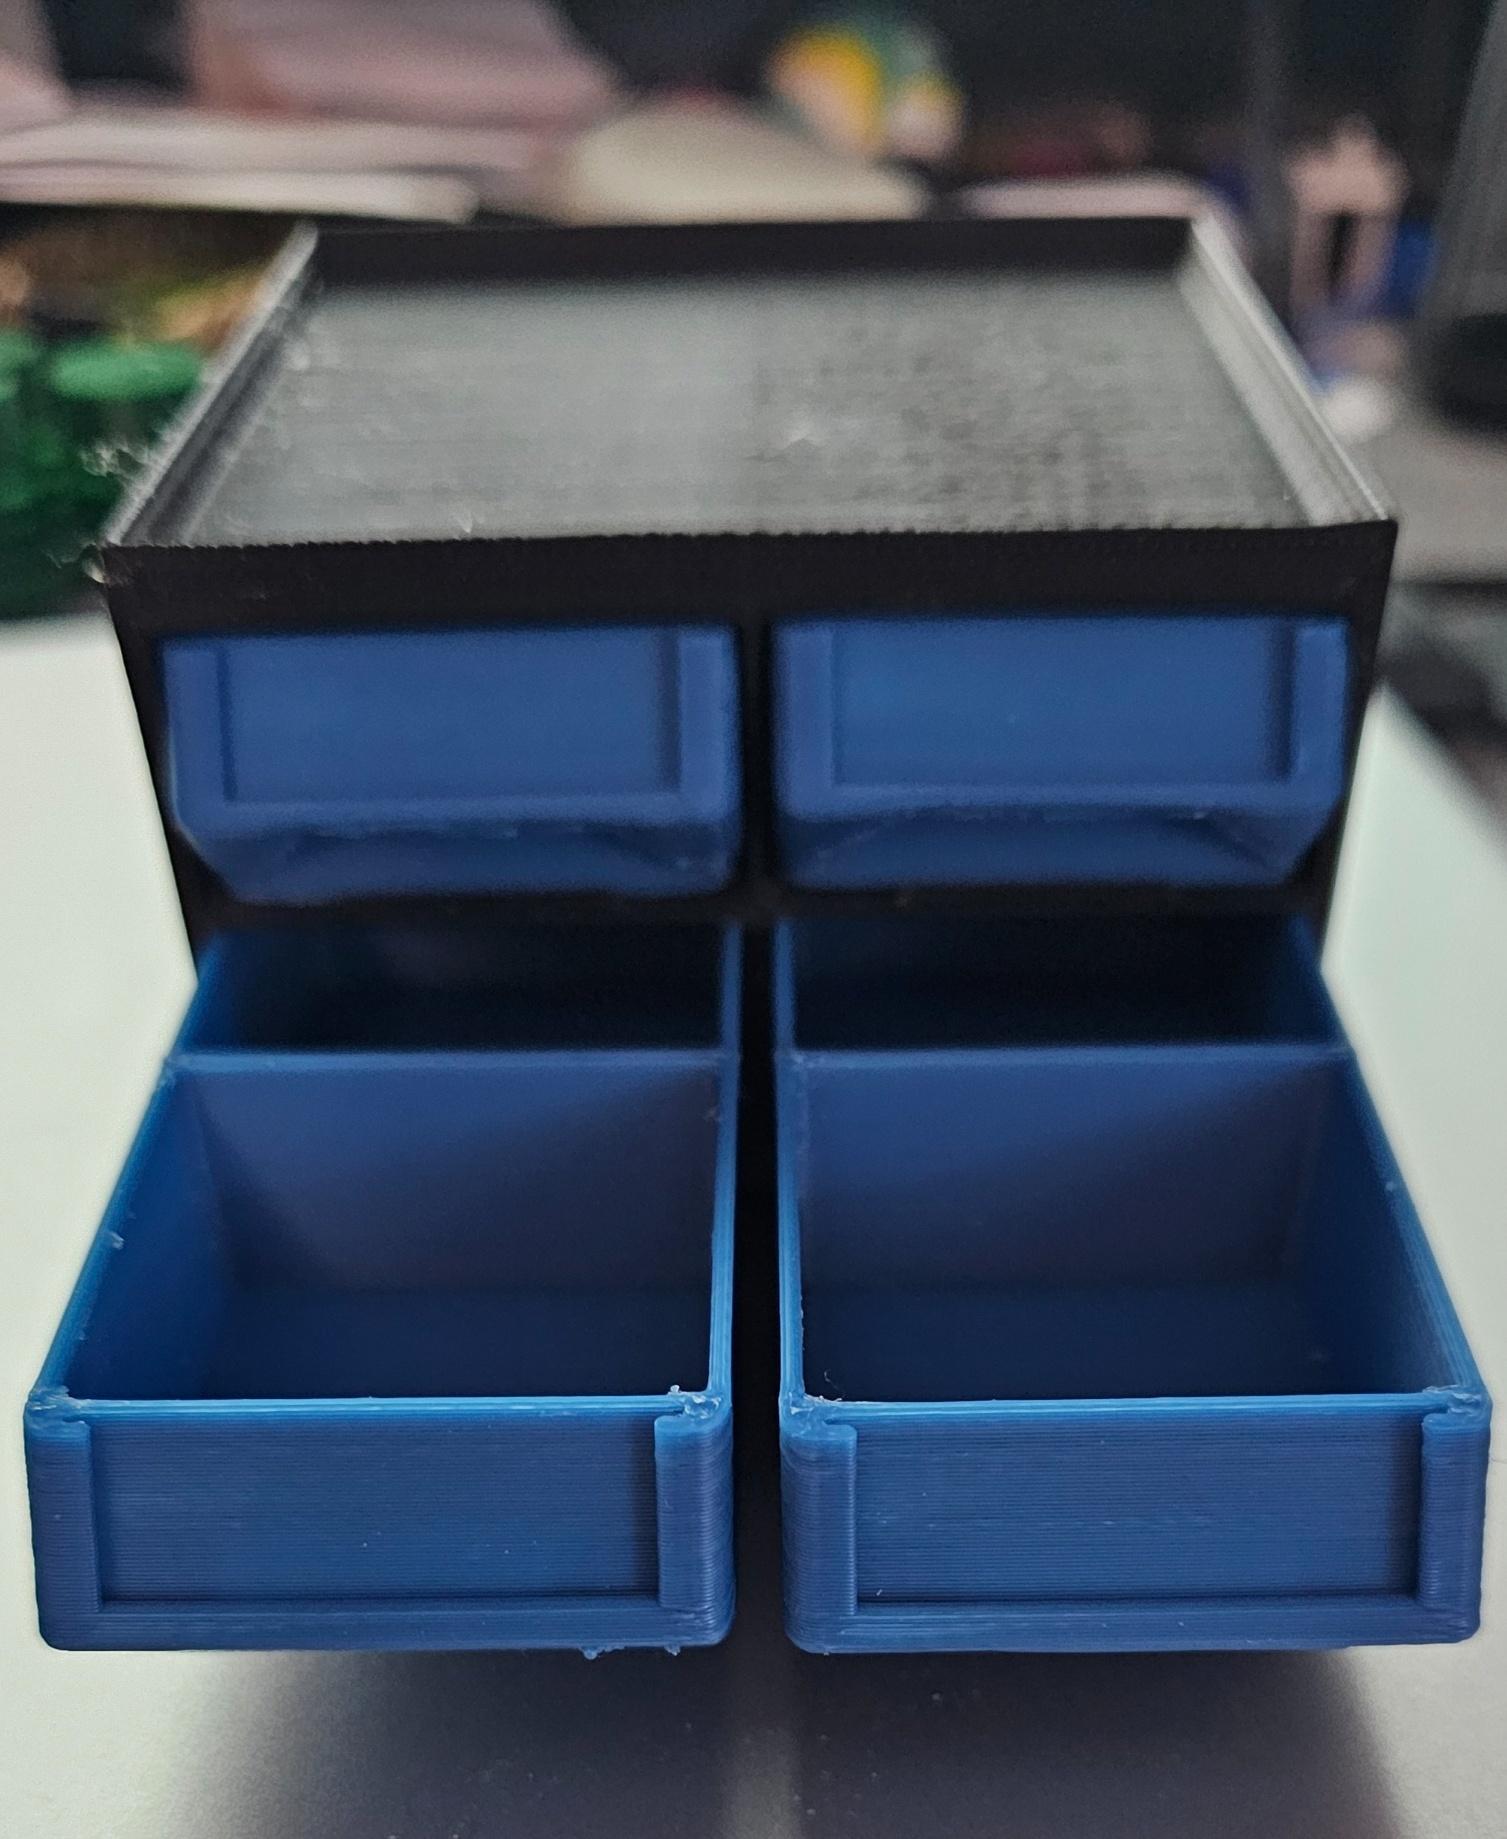 Screwfinity Unit 2U Small - The Gridfinity Storage Unit - Really like how the black and blue compliment each other.
Made a personal use remix of the drawer to add a divider. - 3d model